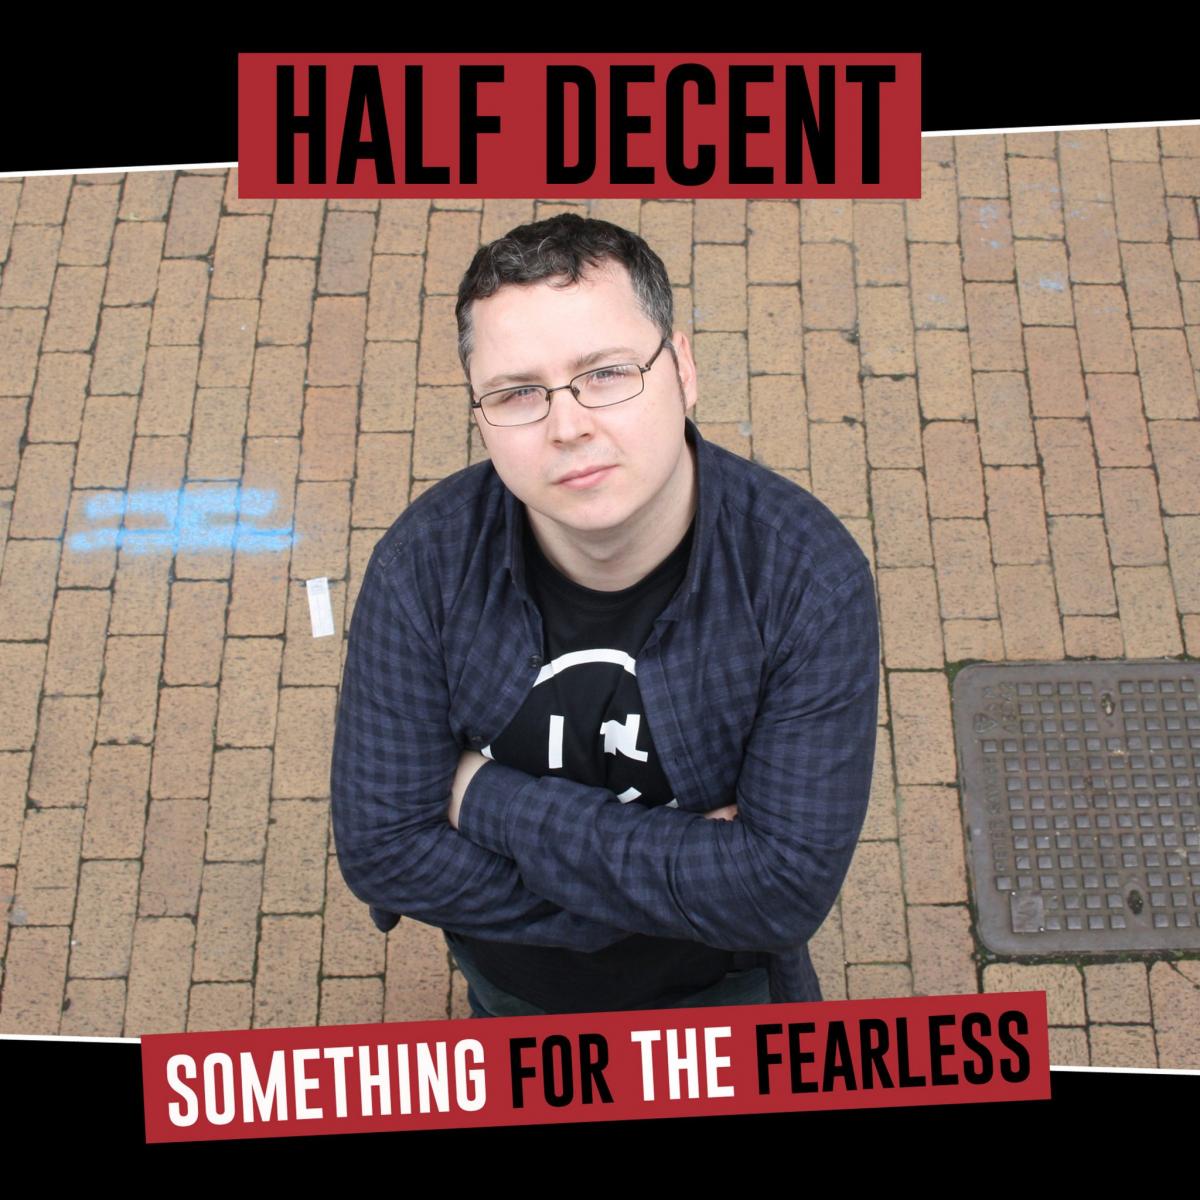 More than half decent: Oxford rapper teams up with record label for 11th EP